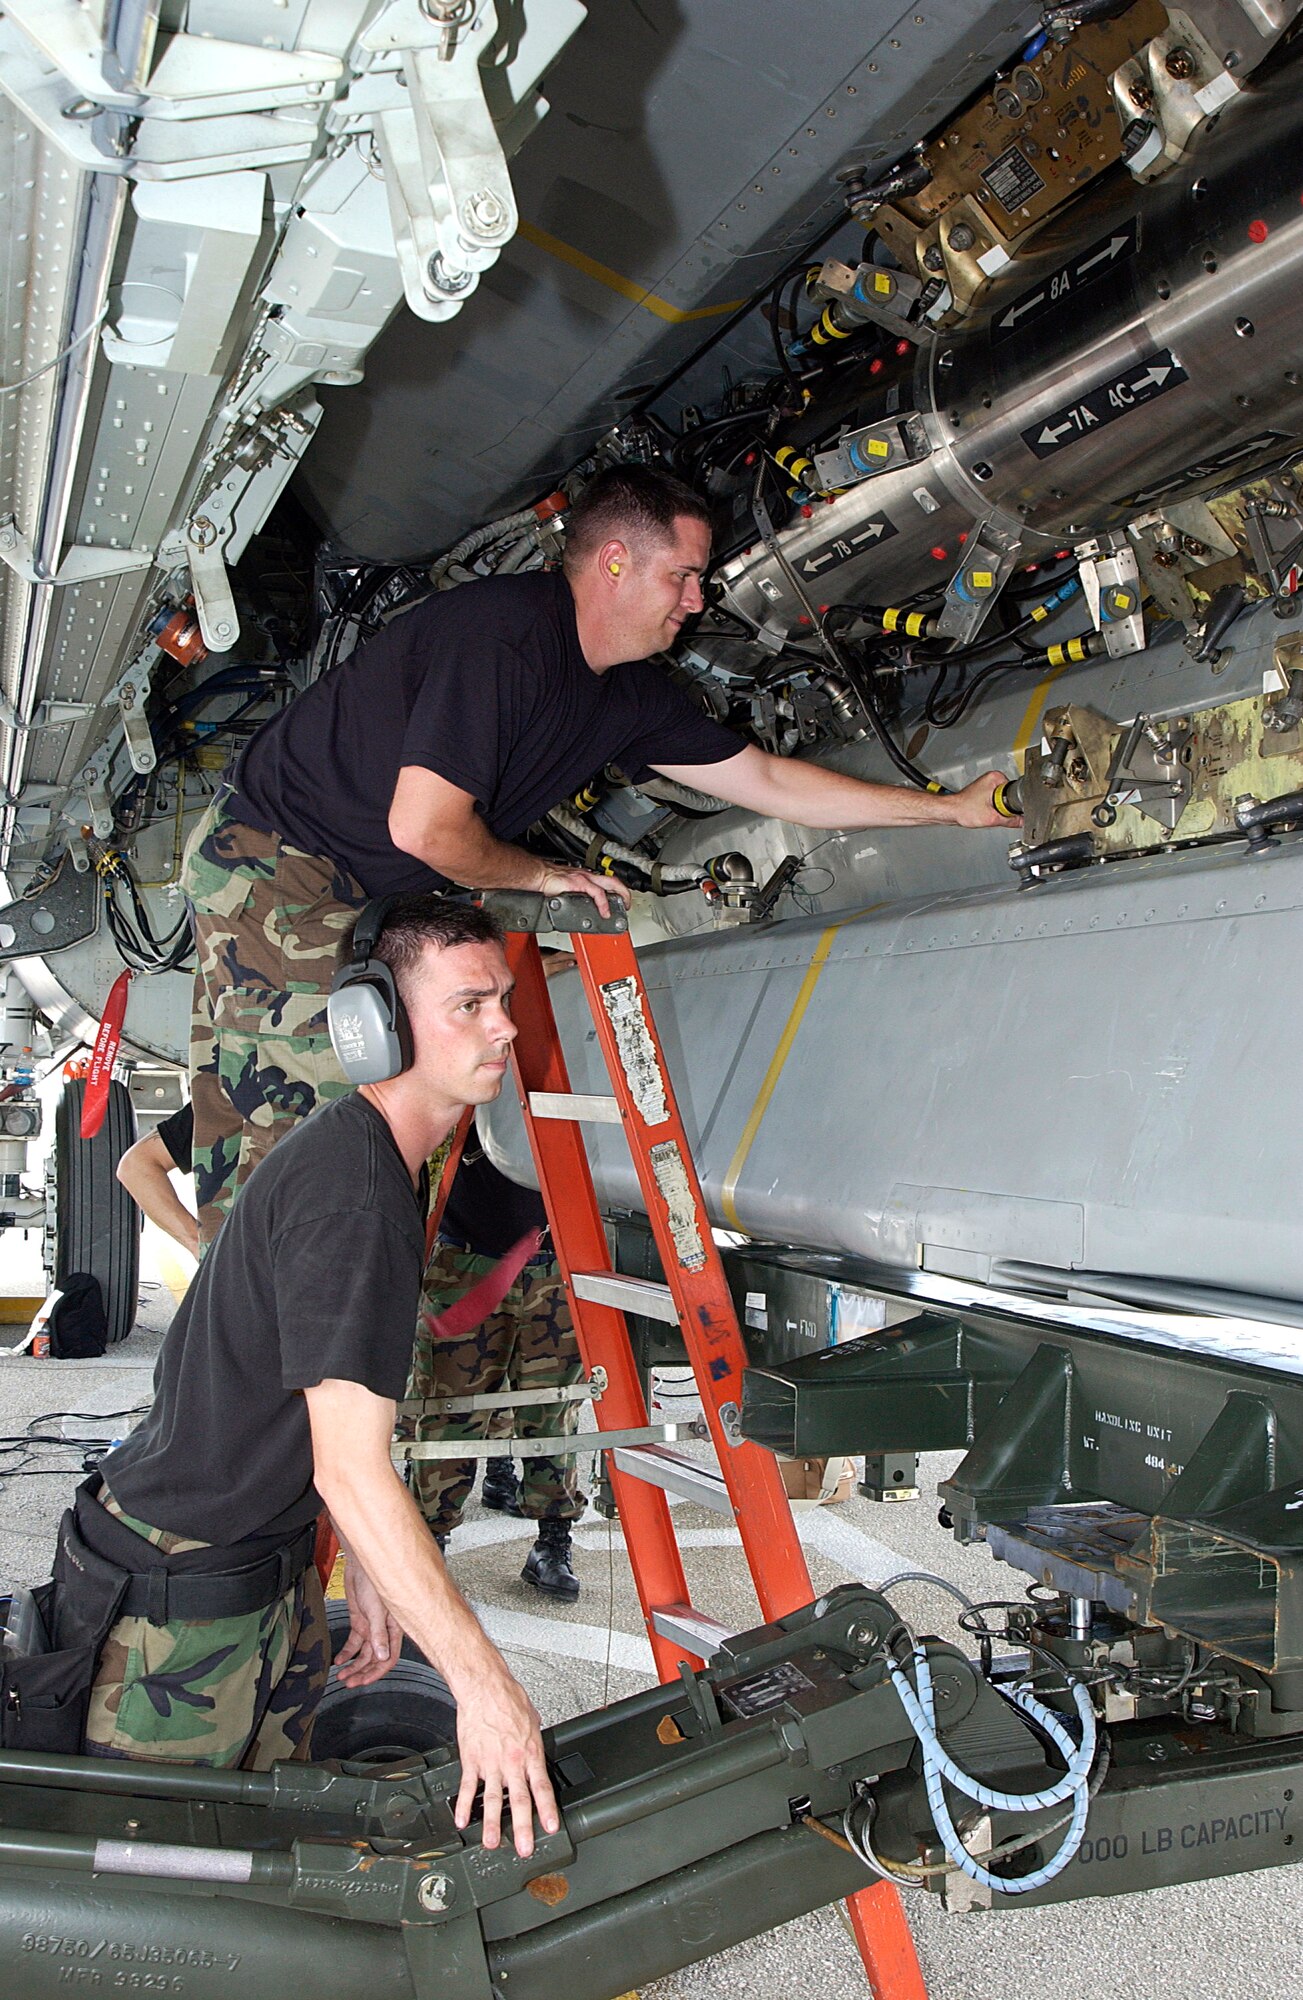 ANDERSEN AIR FORCE BASE, Guam  --  Staff Sgts. John Beldin (top) and Landon Favors, B-52 Stratofortress weapons loaders, prepare an air-launched cruise missle for loading on a B-52 here March 20.  Aircraft and support troops from the 2nd Bomb Wing at Barksdale Air Force Base, La., are deployed as part of the 7th Air Expeditionary Wing.  (U.S. Air Force photo by Senior Airman Christina M. Rumsey)